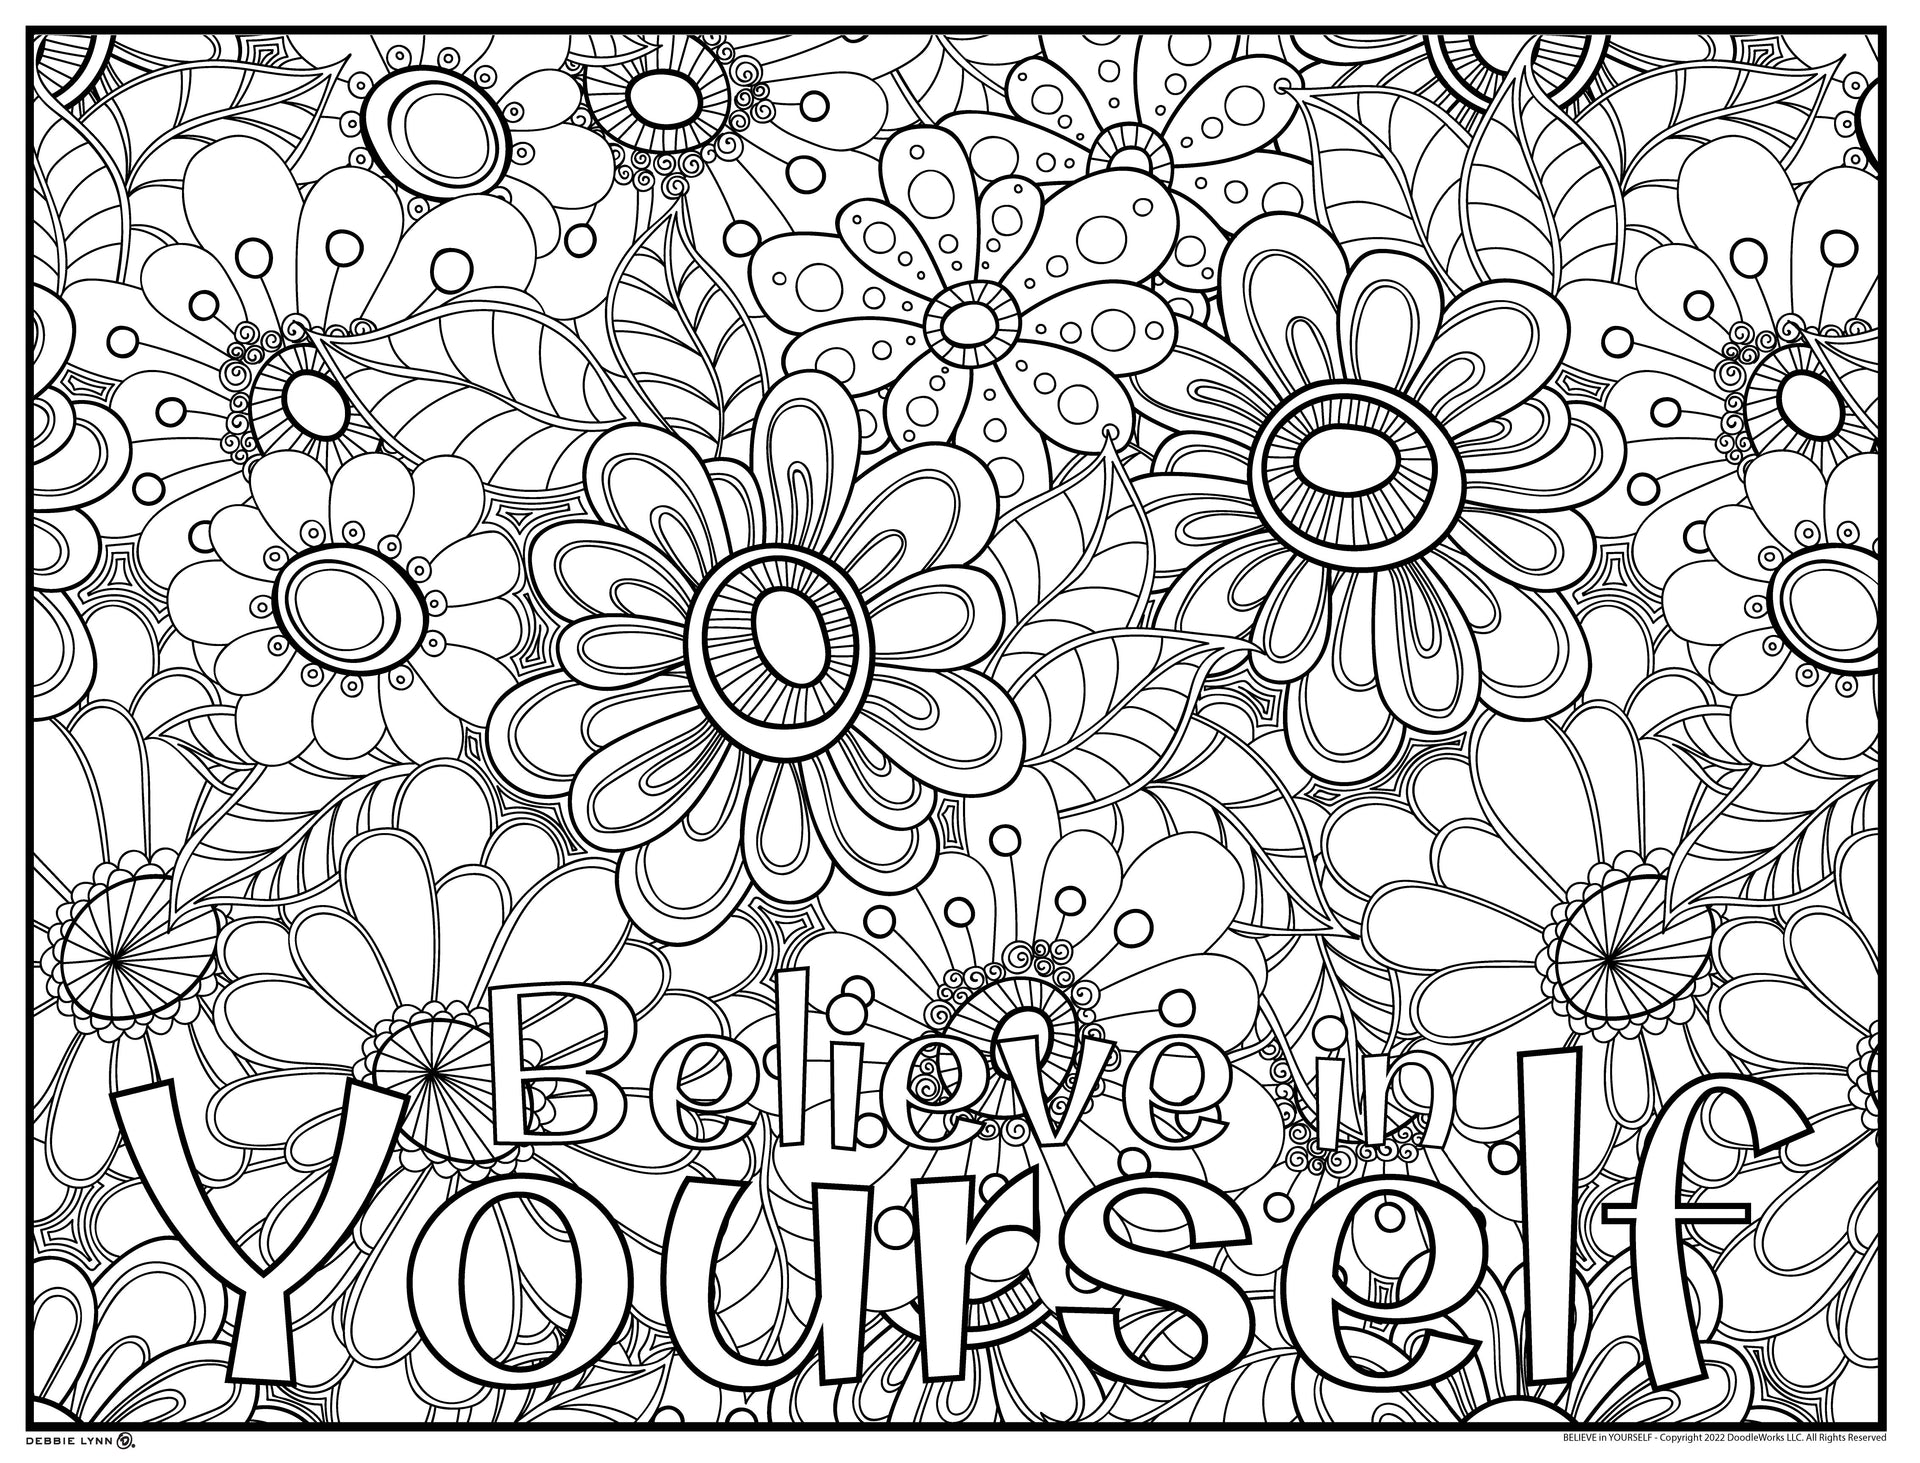 100 Page Believe in Yourself Adult Coloring Book Printable/ Digital  Download -   Coloring pages inspirational, Adult coloring books  printables, Adult coloring book pages